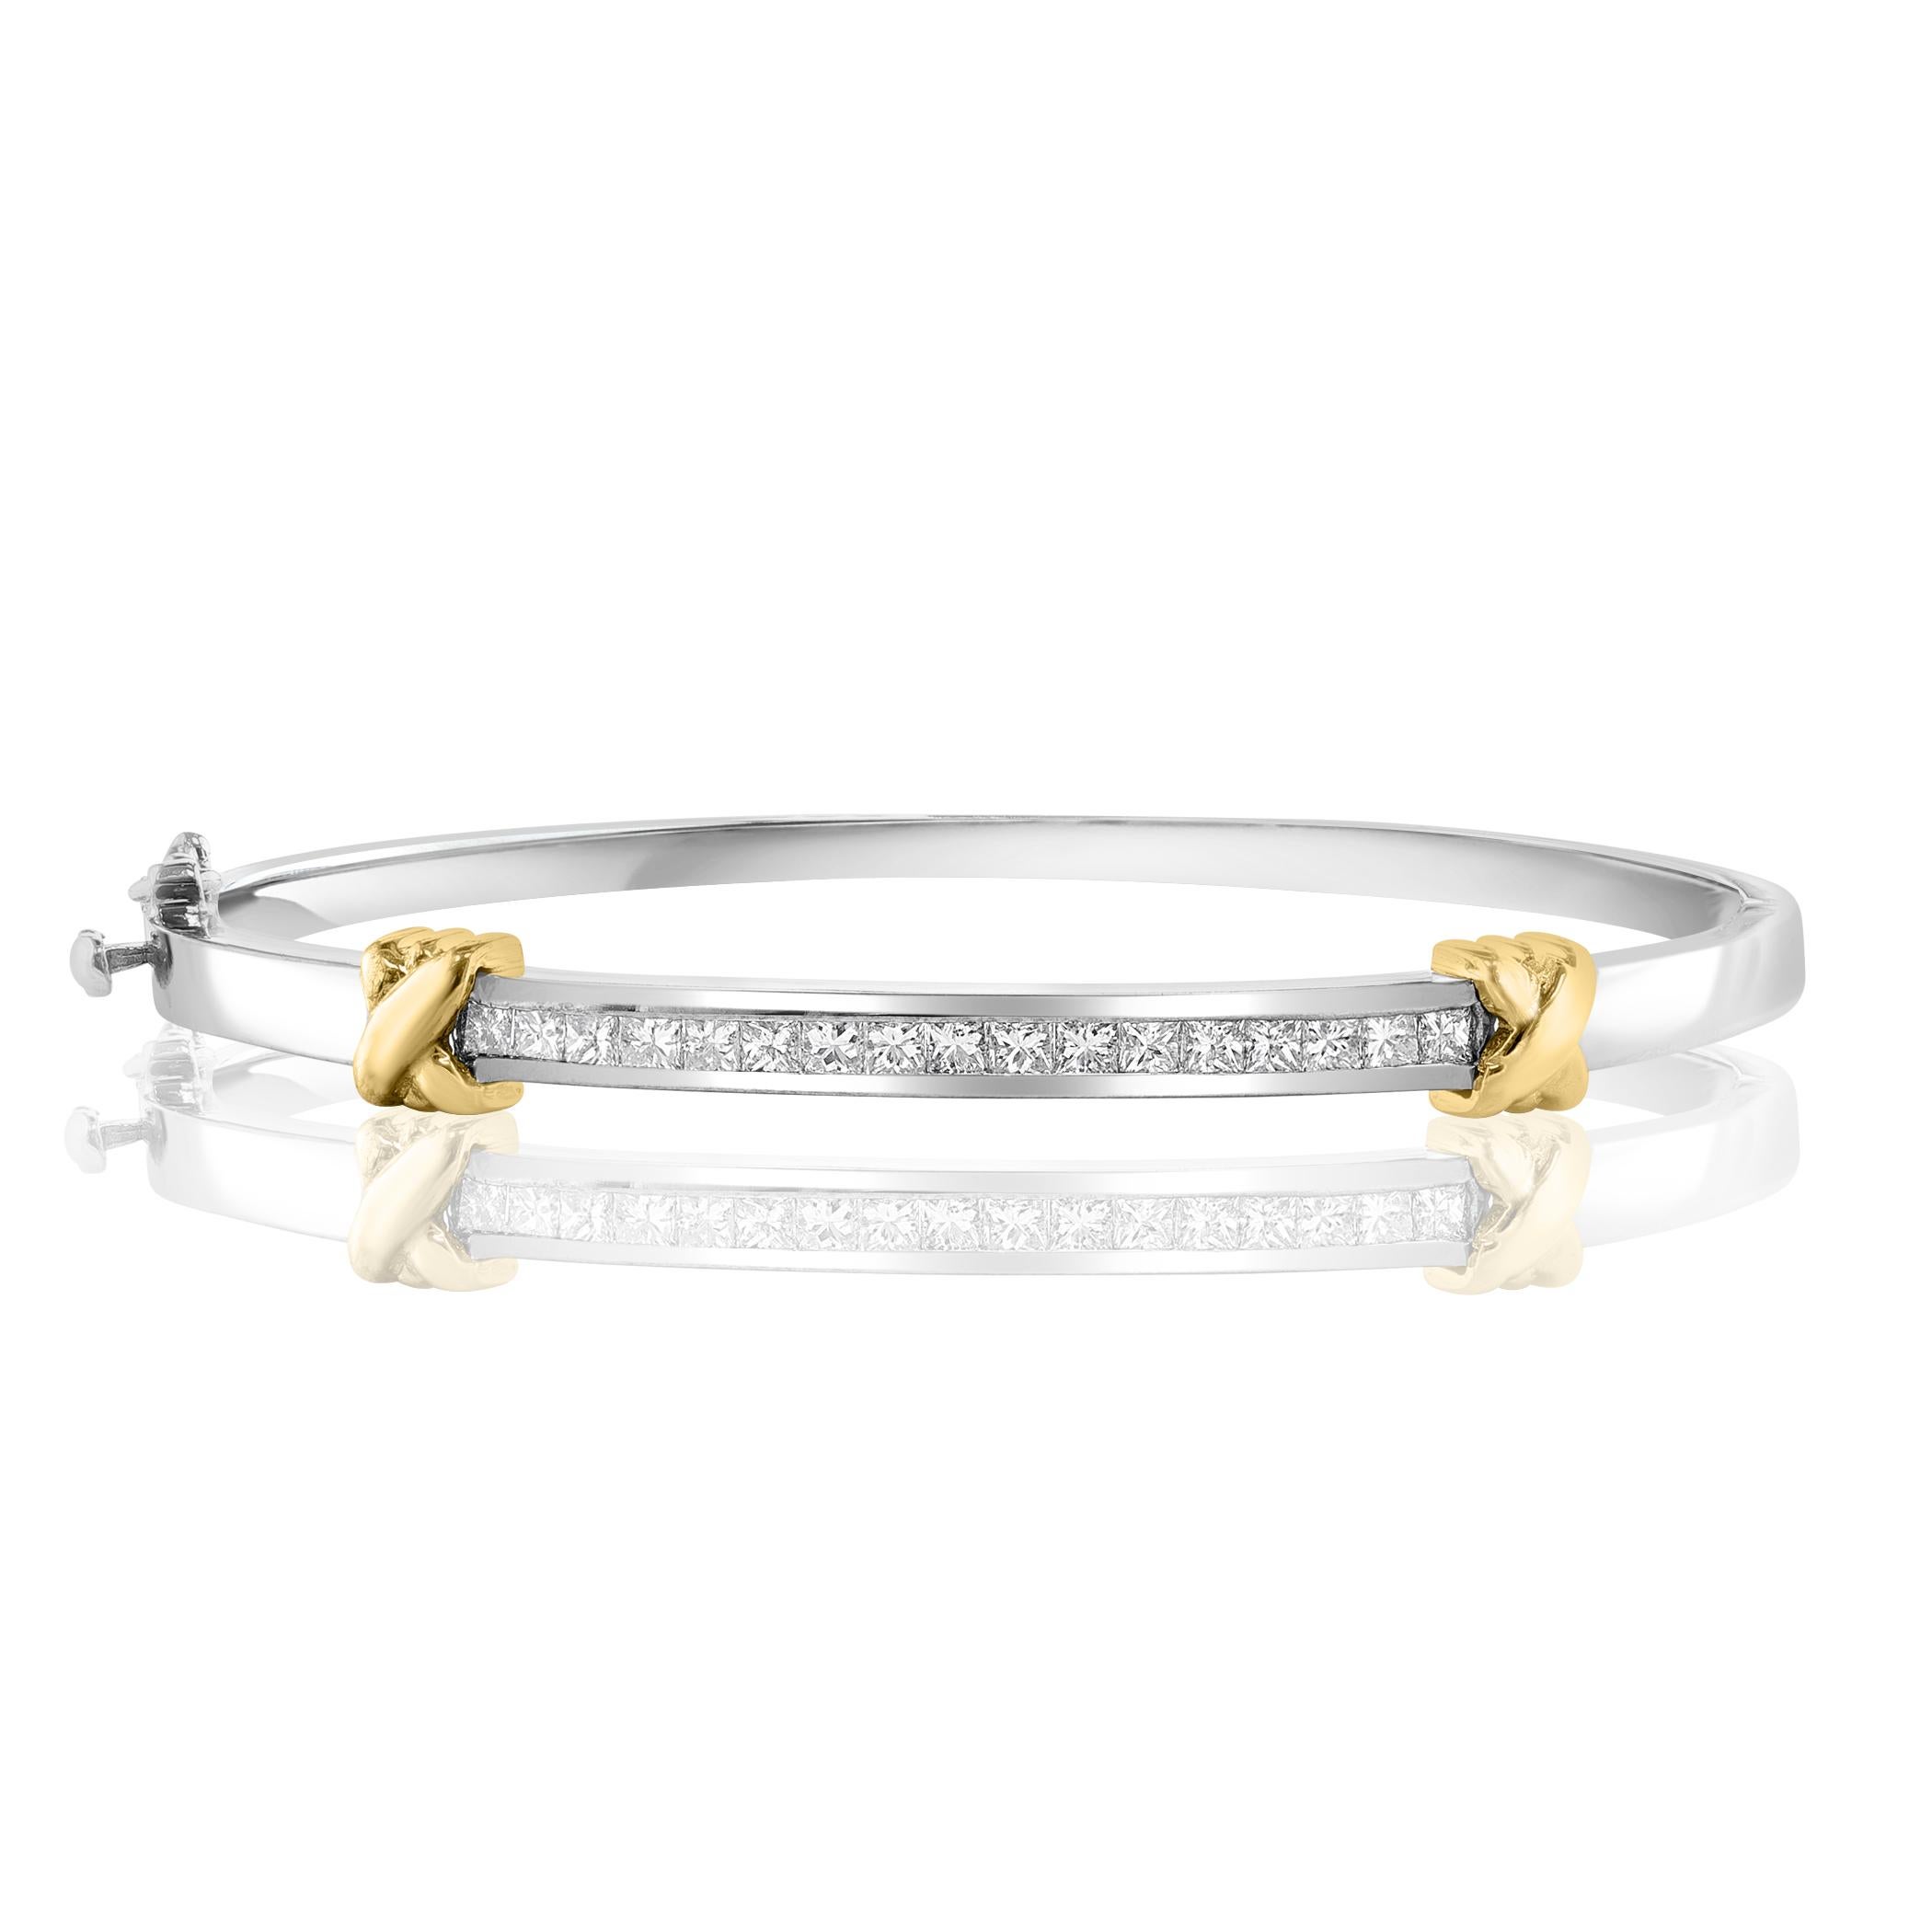 A stunning bangle set with 17 sparkling princess cut diamonds weighing 1.80 carats total. Set in polished 14k mix gold. Double lock mechanism for maximum security. A simple yet dazzling piece.

All diamonds are GH color SI1 Clarity.
Style available